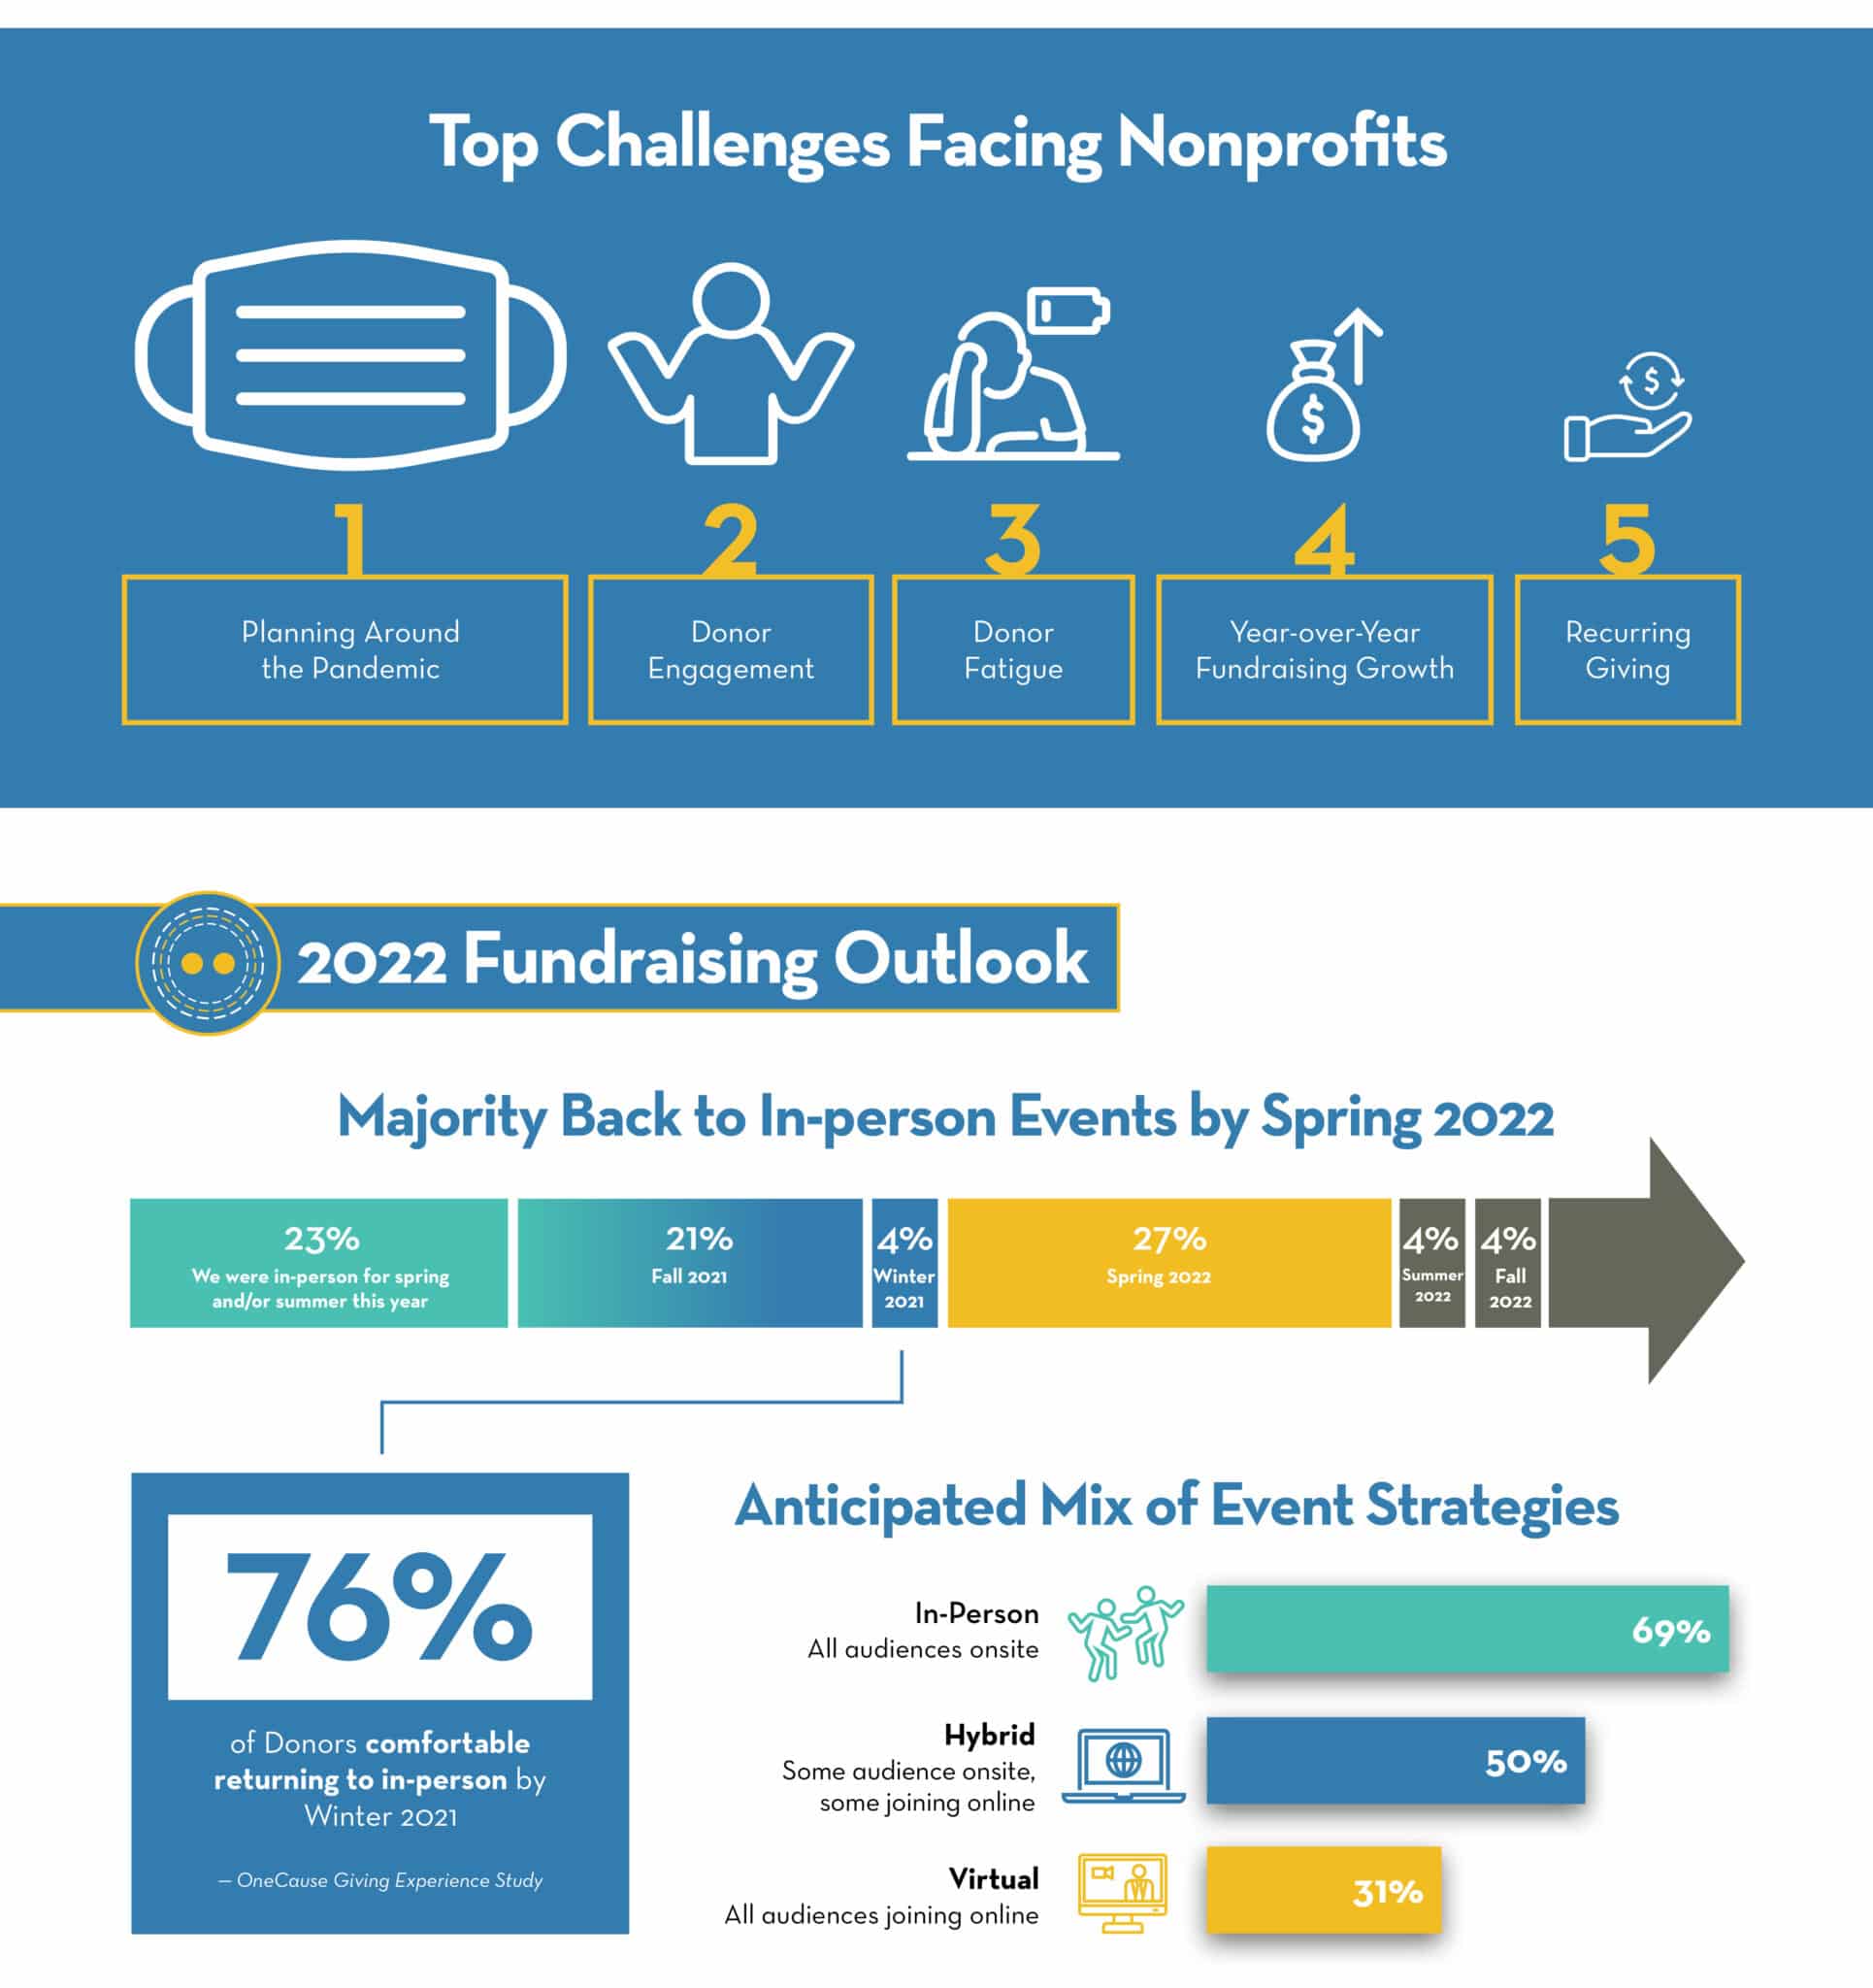 The 2021 Fundraising Outlook